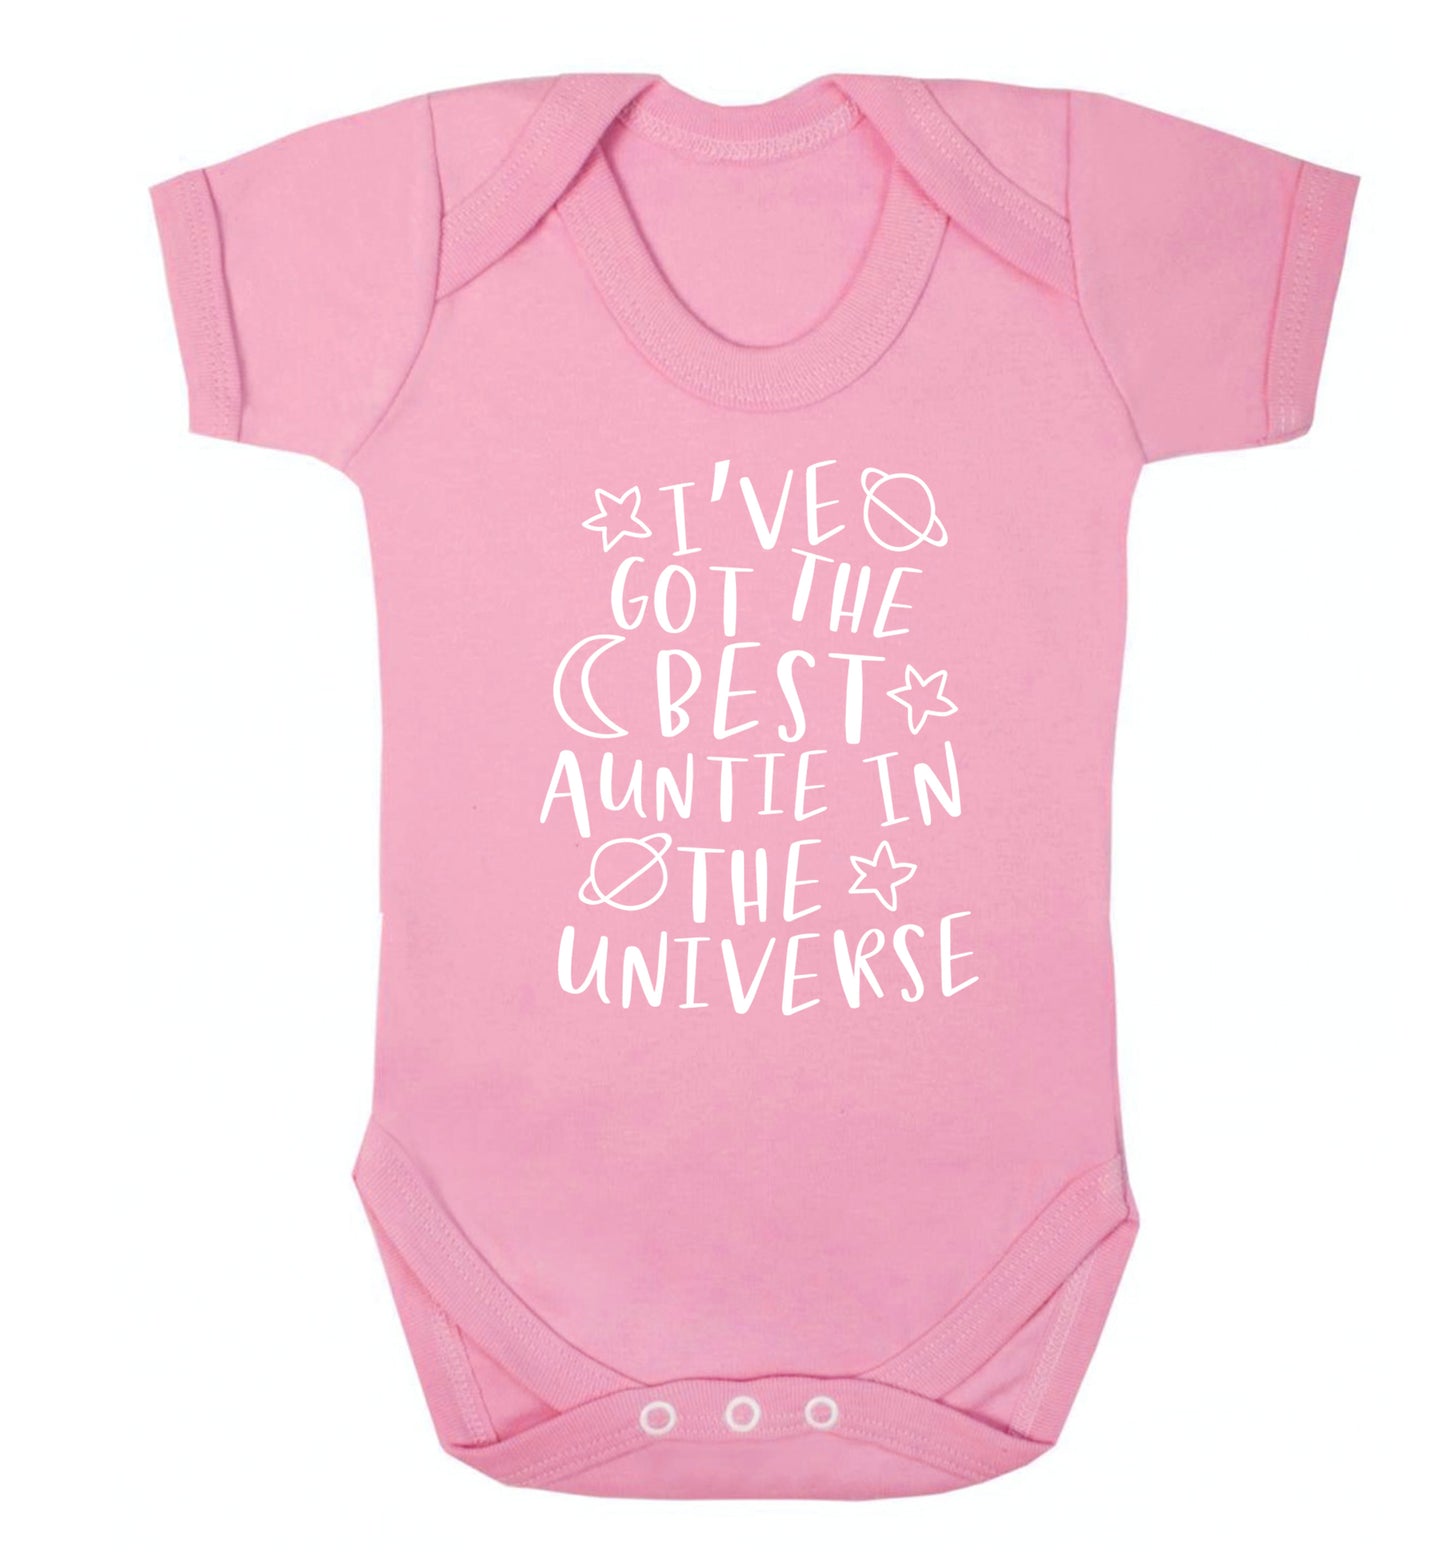 I've got the best auntie in the universe Baby Vest pale pink 18-24 months